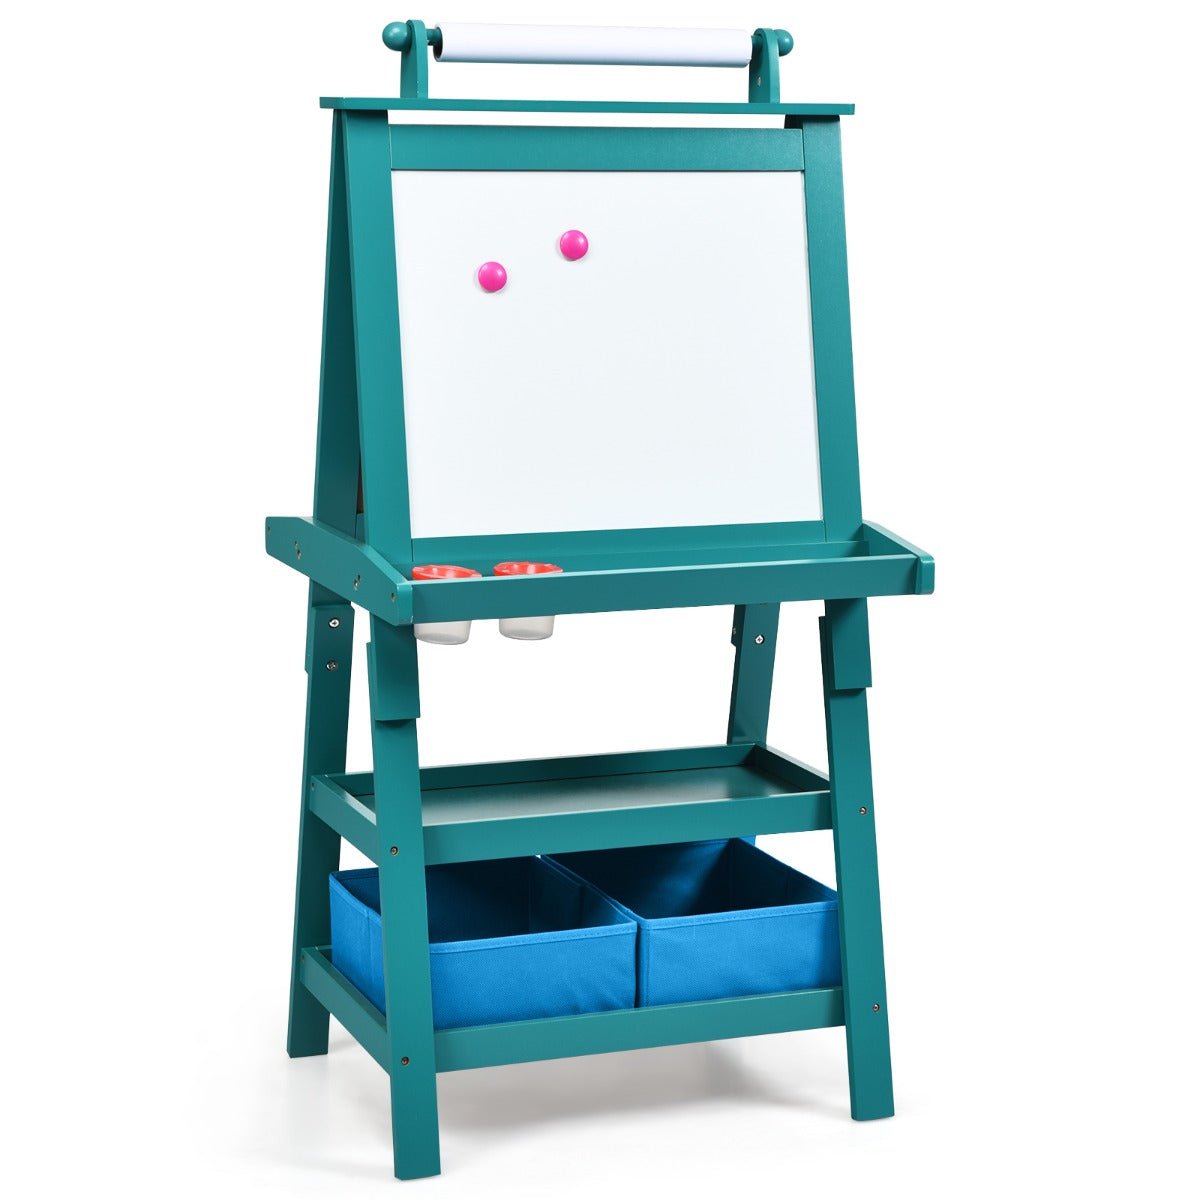 Discover Creativity: Teal Blue Easel with Whiteboard and Chalkboard